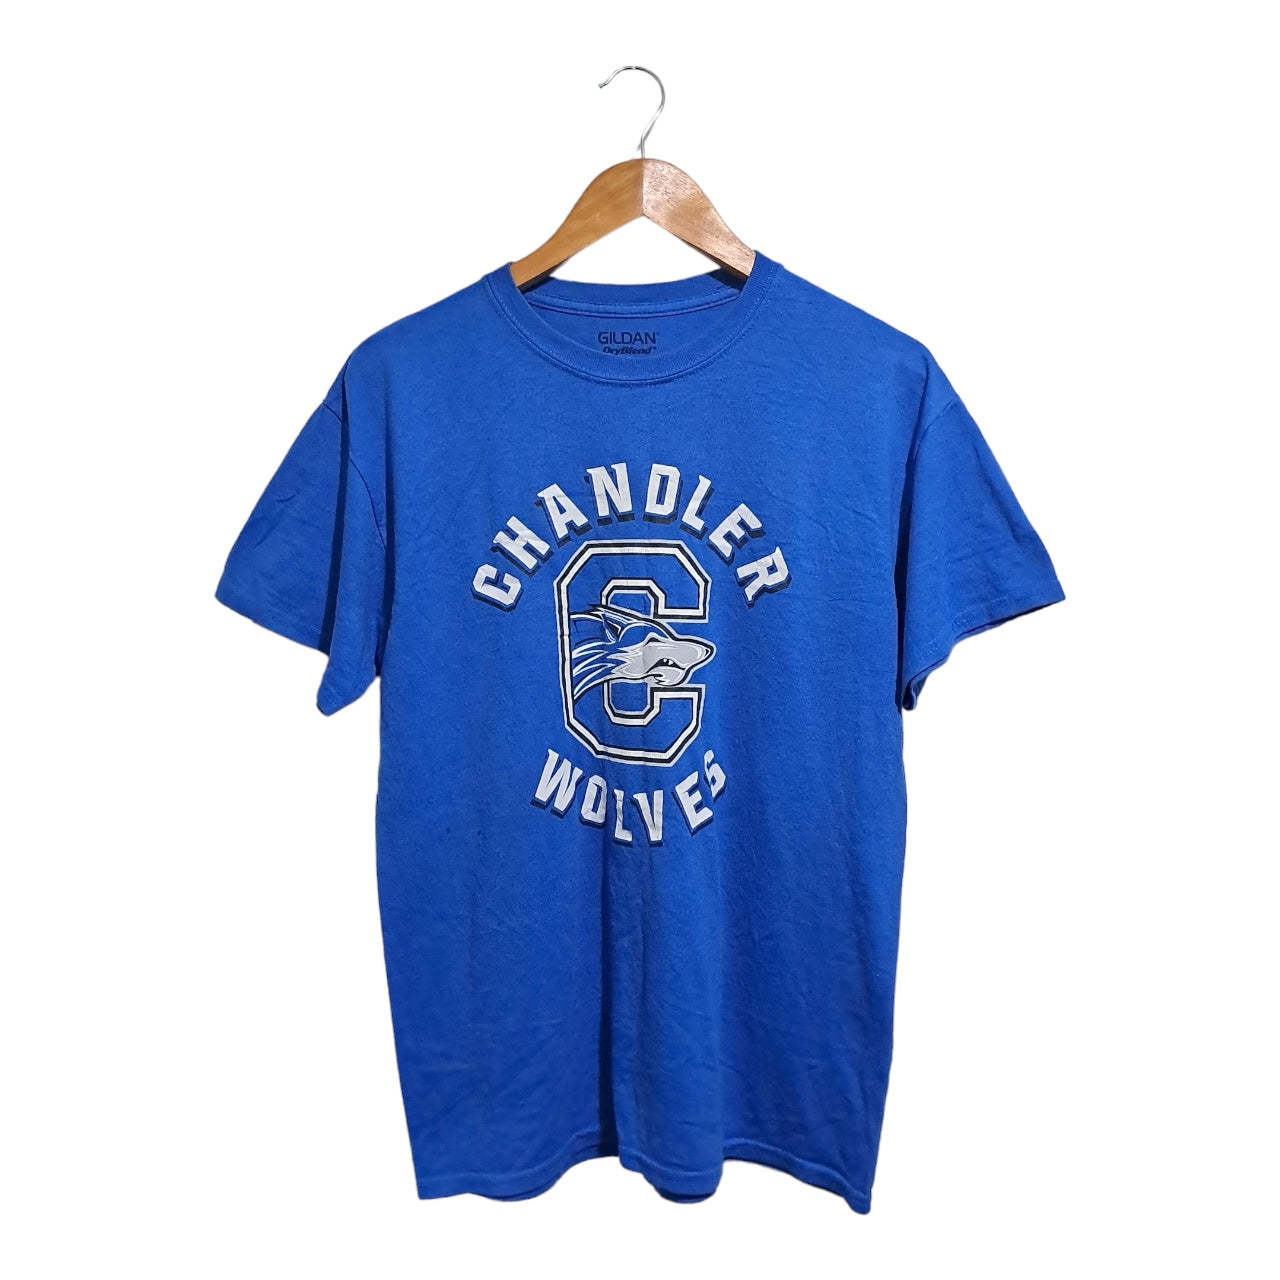 Blue Chandler Wolves tee
80% cotton 